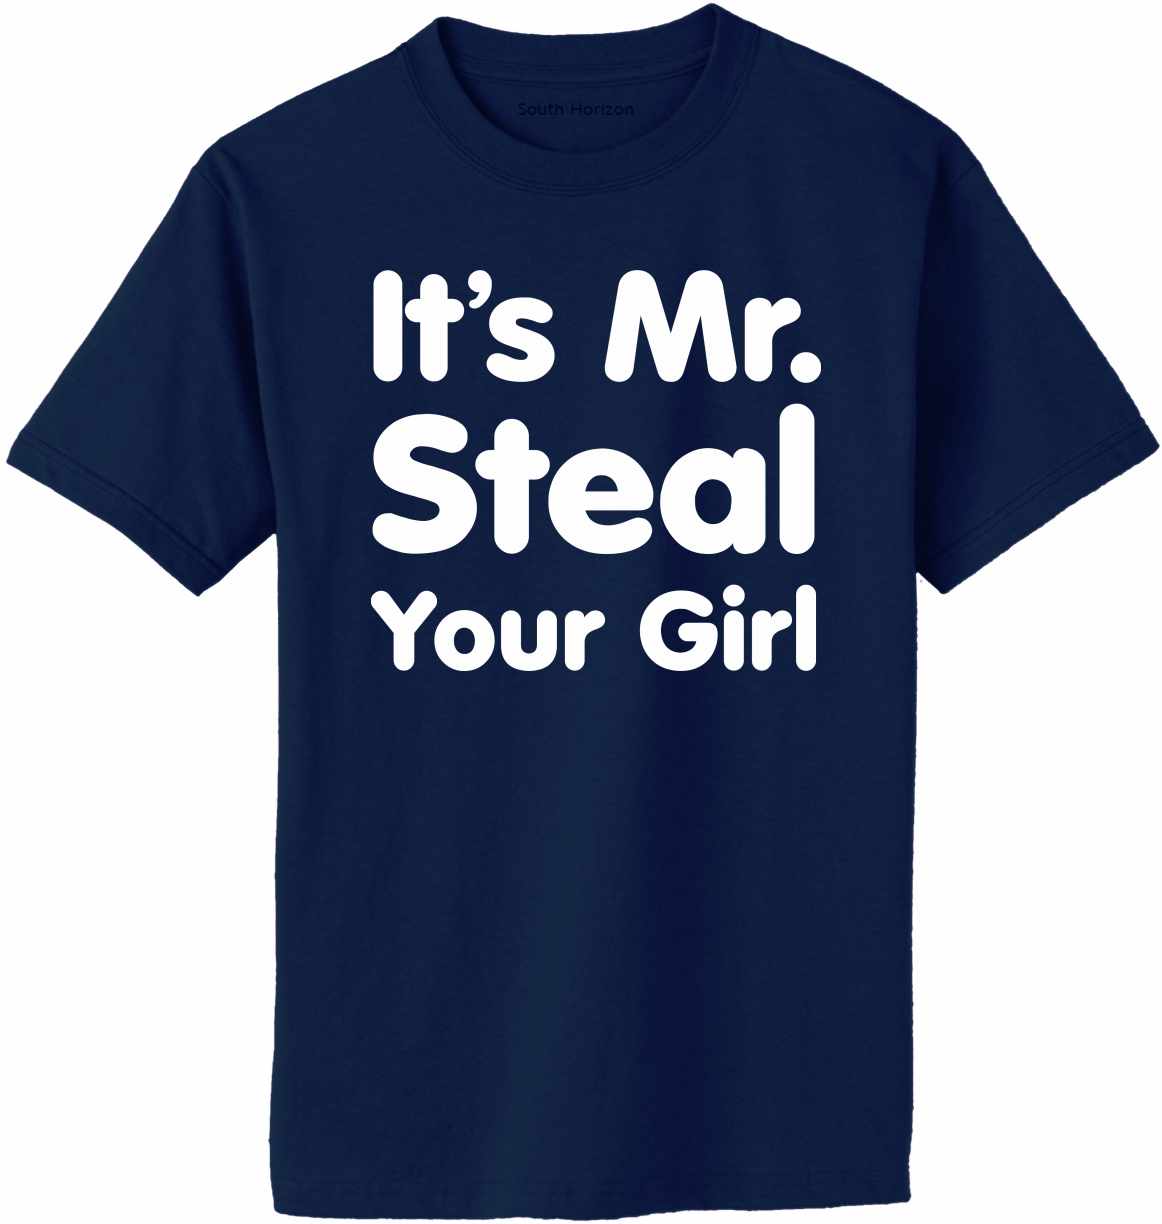 It's Mr. Steal Your Girl Adult T-Shirt